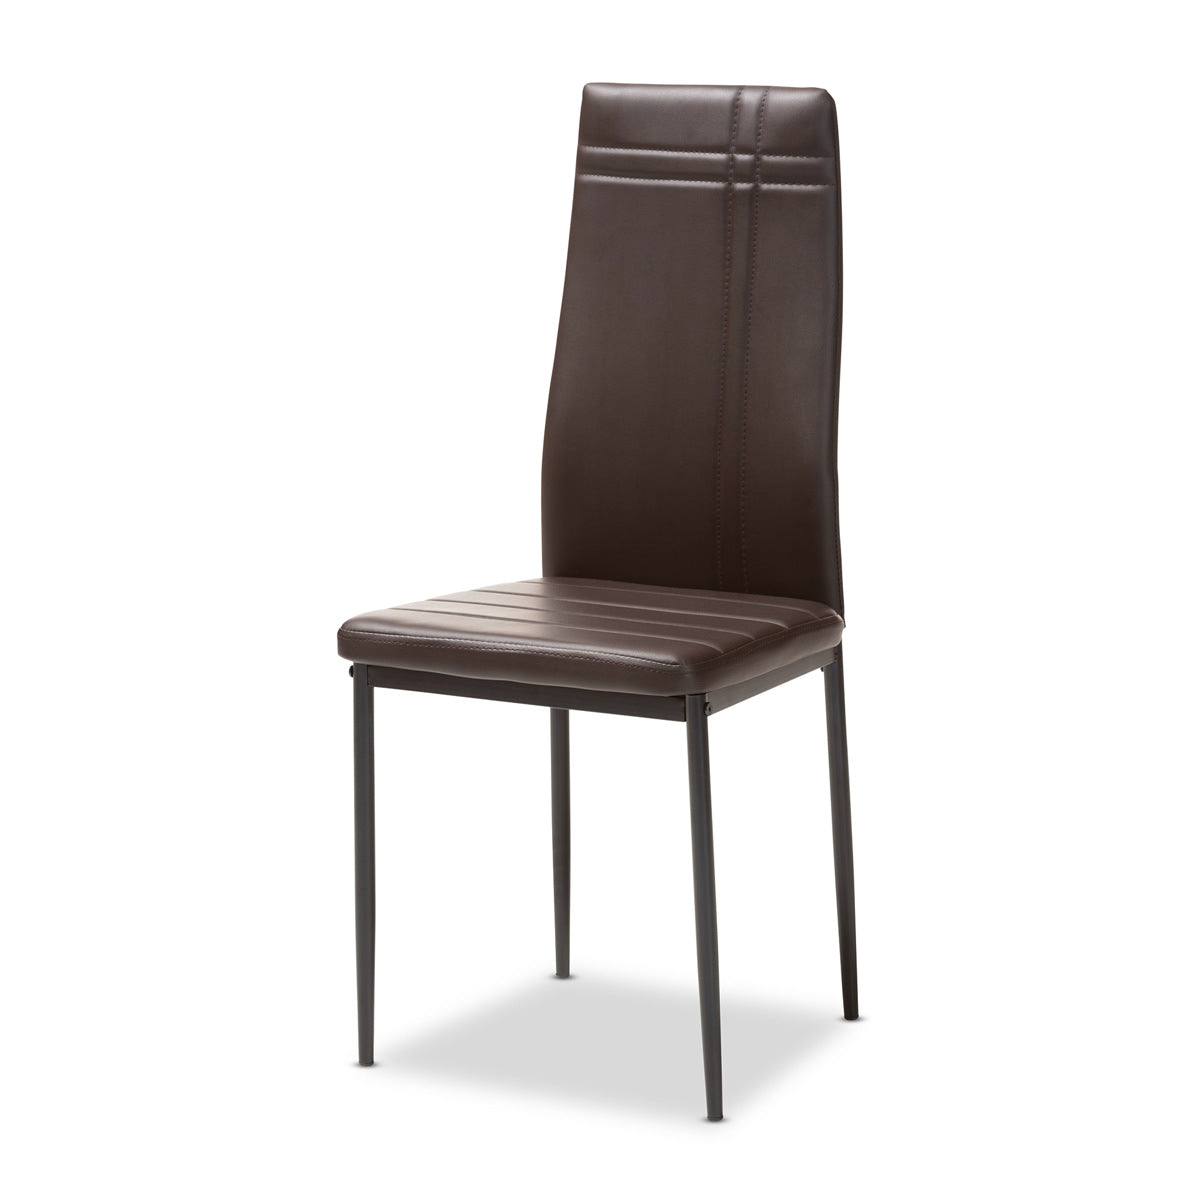 Baxton Studio Matiese Modern and Contemporary Brown Faux Leather Upholstered Dining Chair (Set of 4) Baxton Studio-dining chair-Minimal And Modern - 2